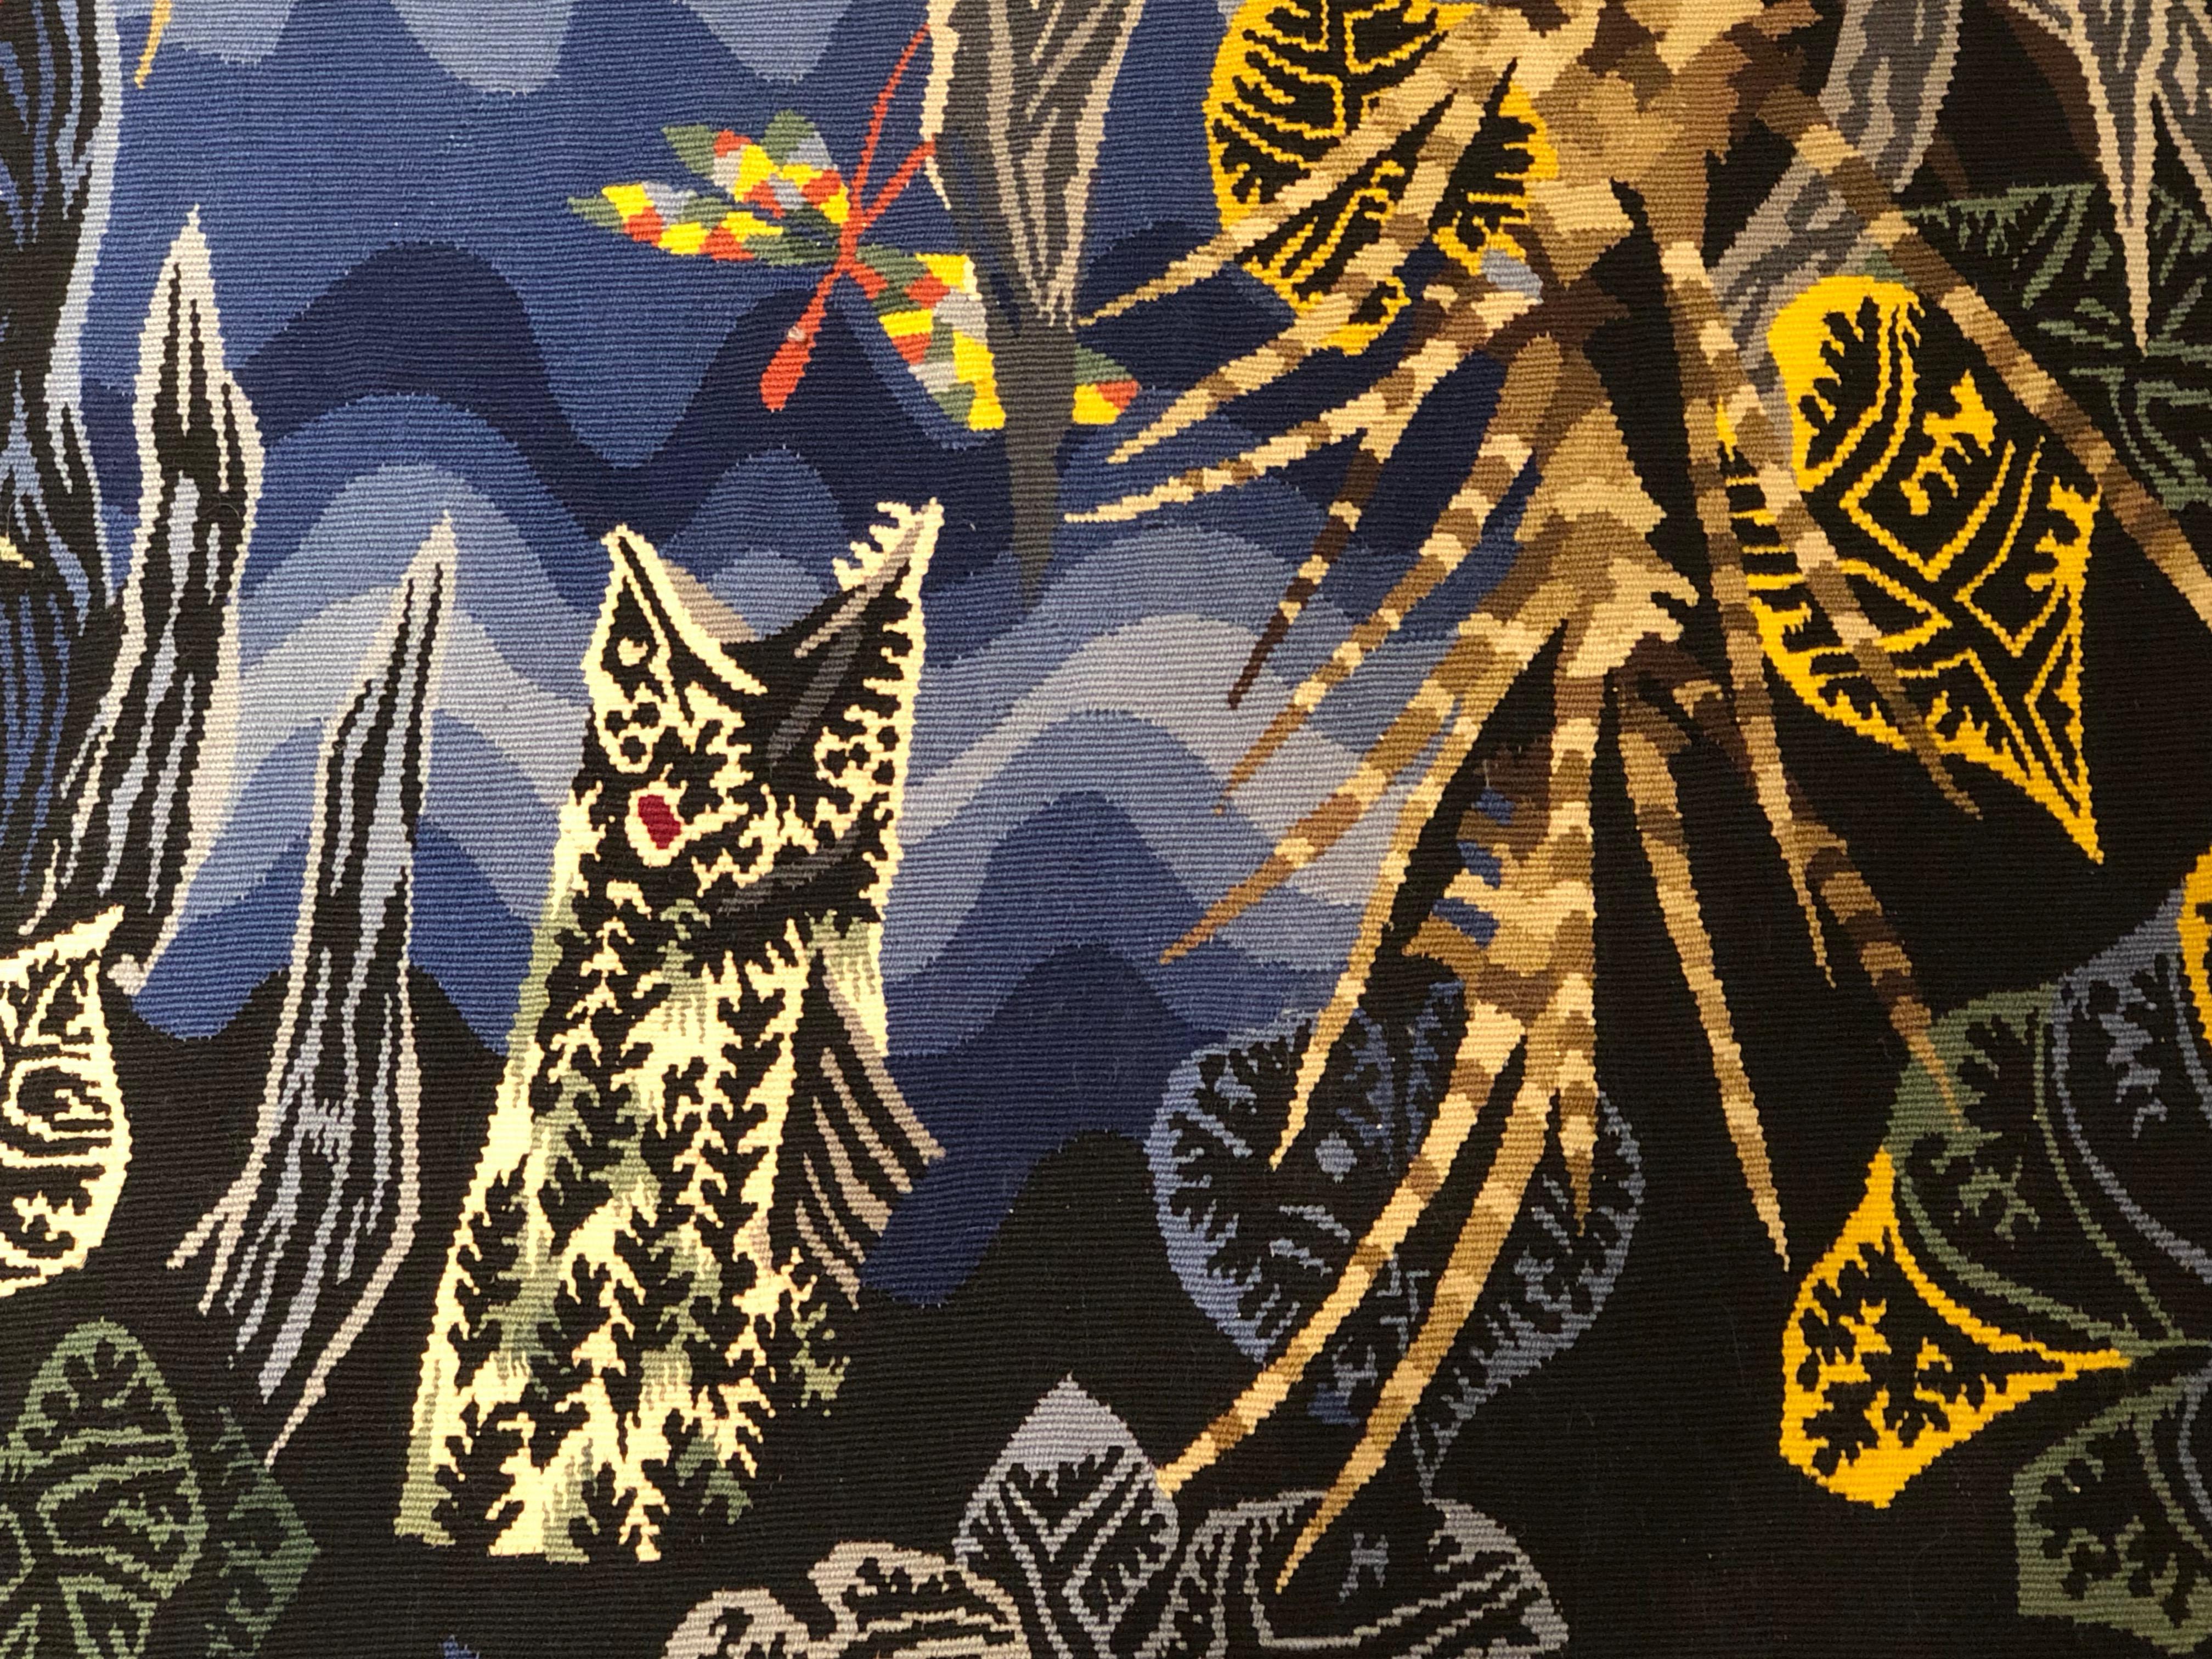 Midcentury tapestry designed by Jean Lurcat (1892-1966) and woven at Atelier Tabard Freres in Aubusson, France. Hand woven in wool, it dates to ca. 1950 and entitled 